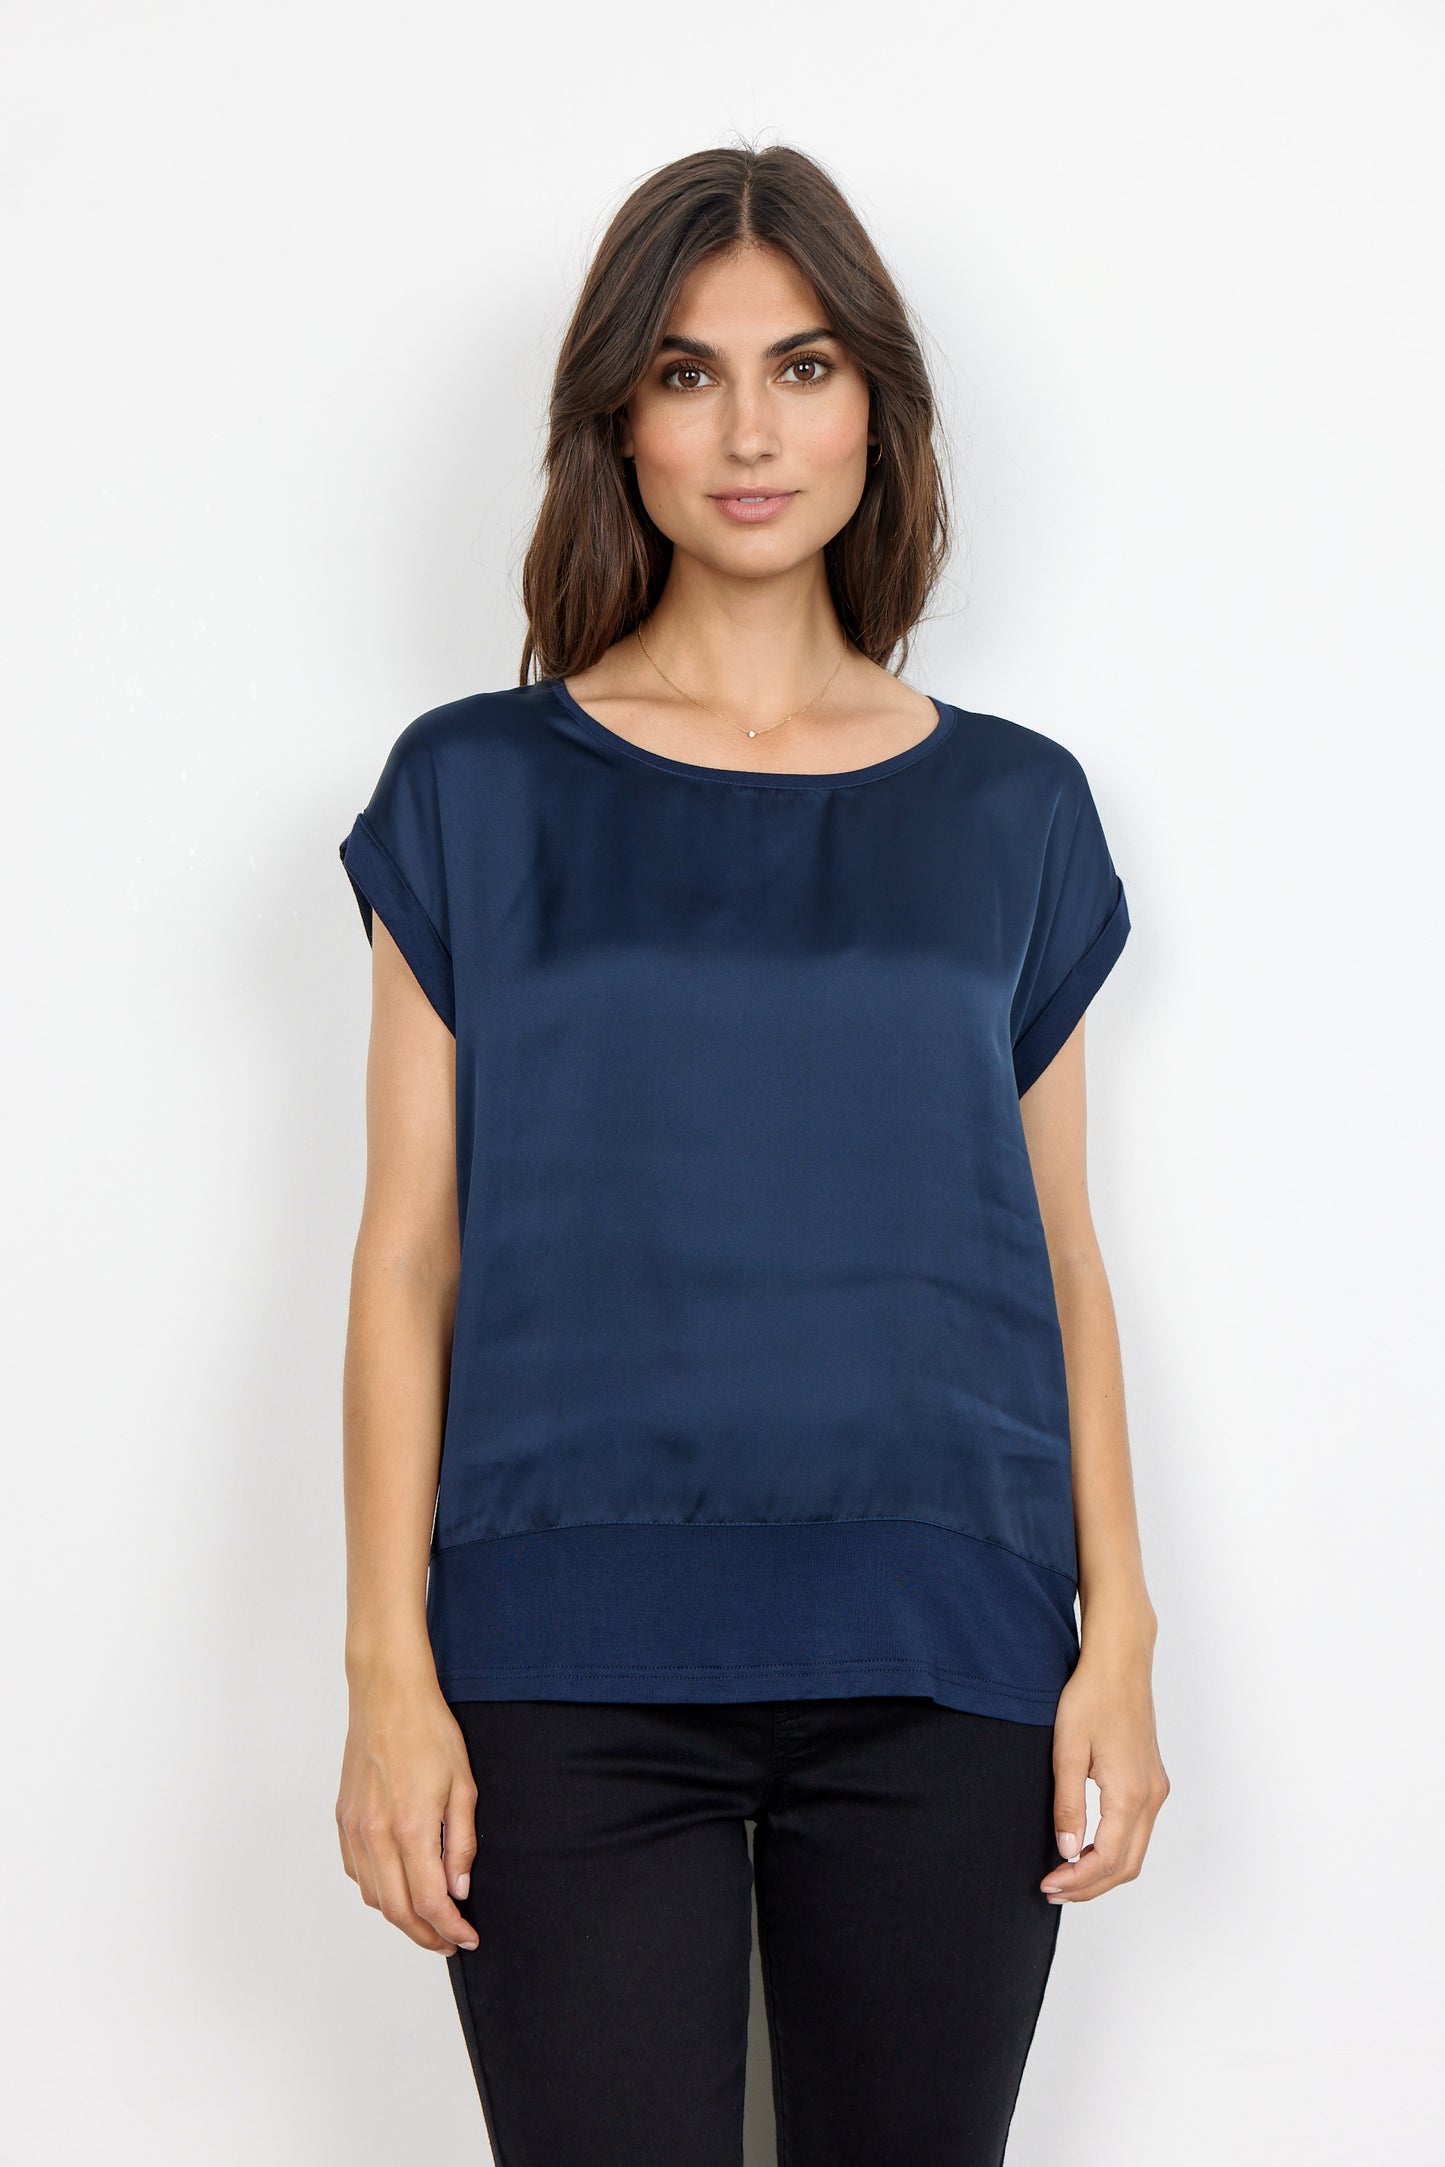 Soyaconcept - Thilde ‘6’ Top / Navy